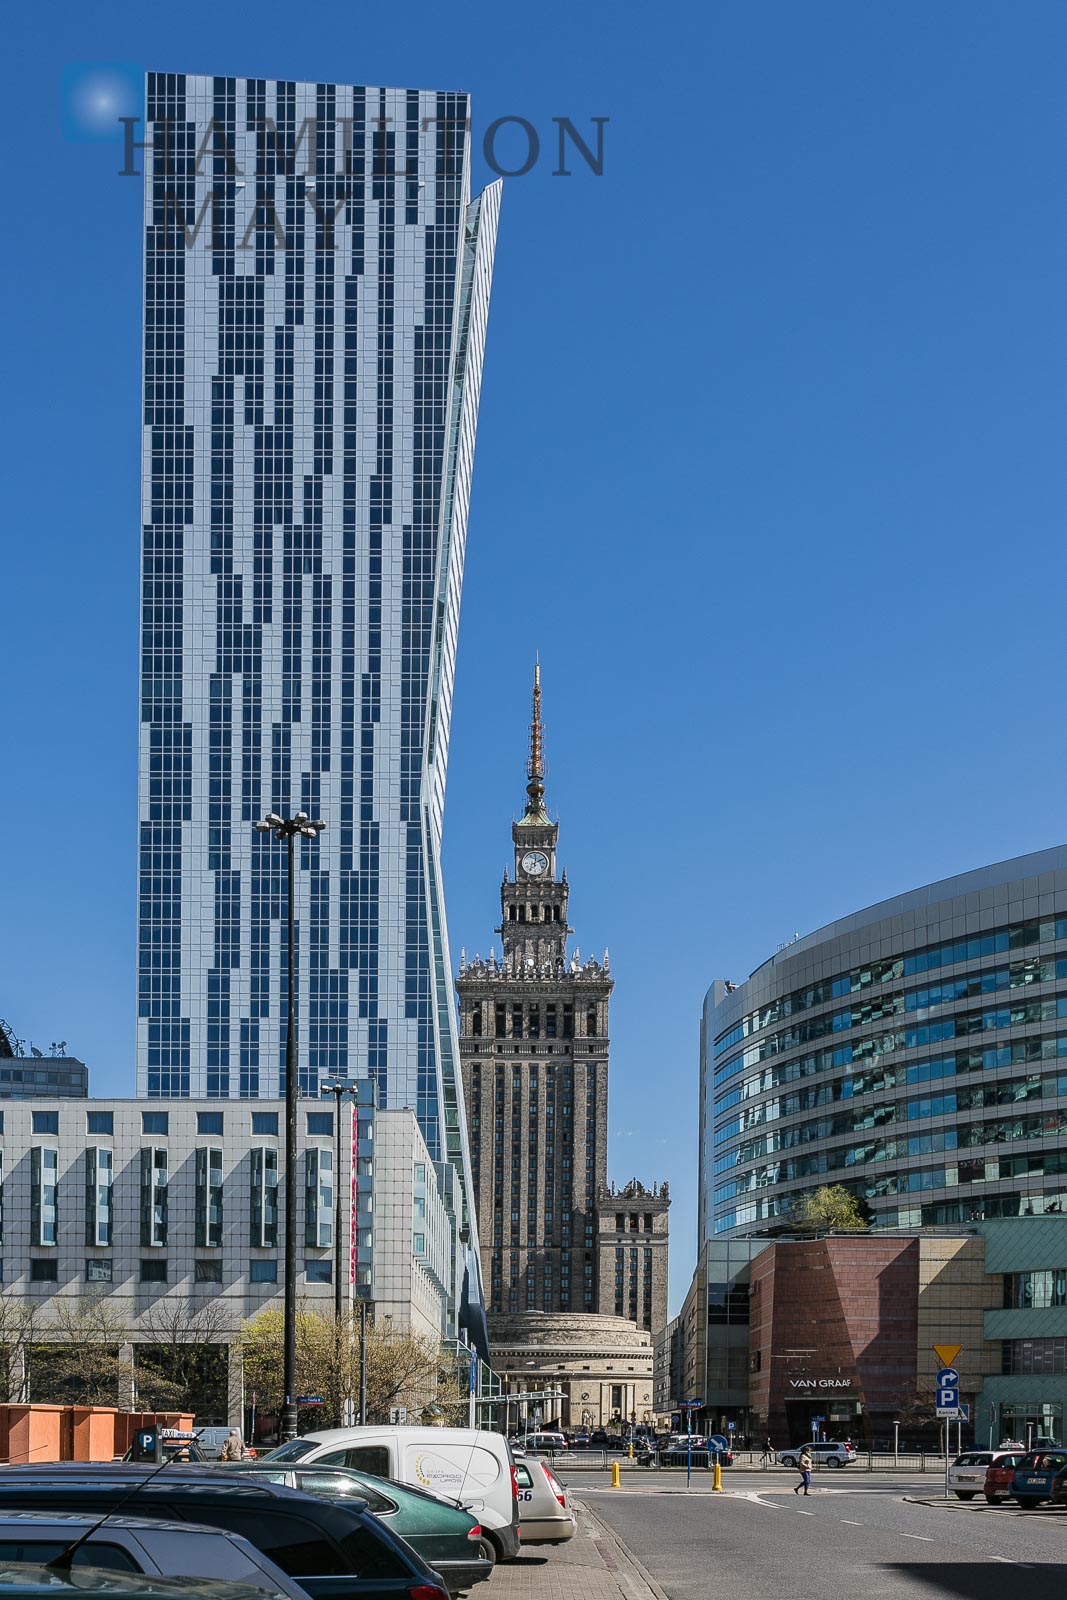 Złota 44 - a highly luxurious residential tower located in the heart of Warsaws business district